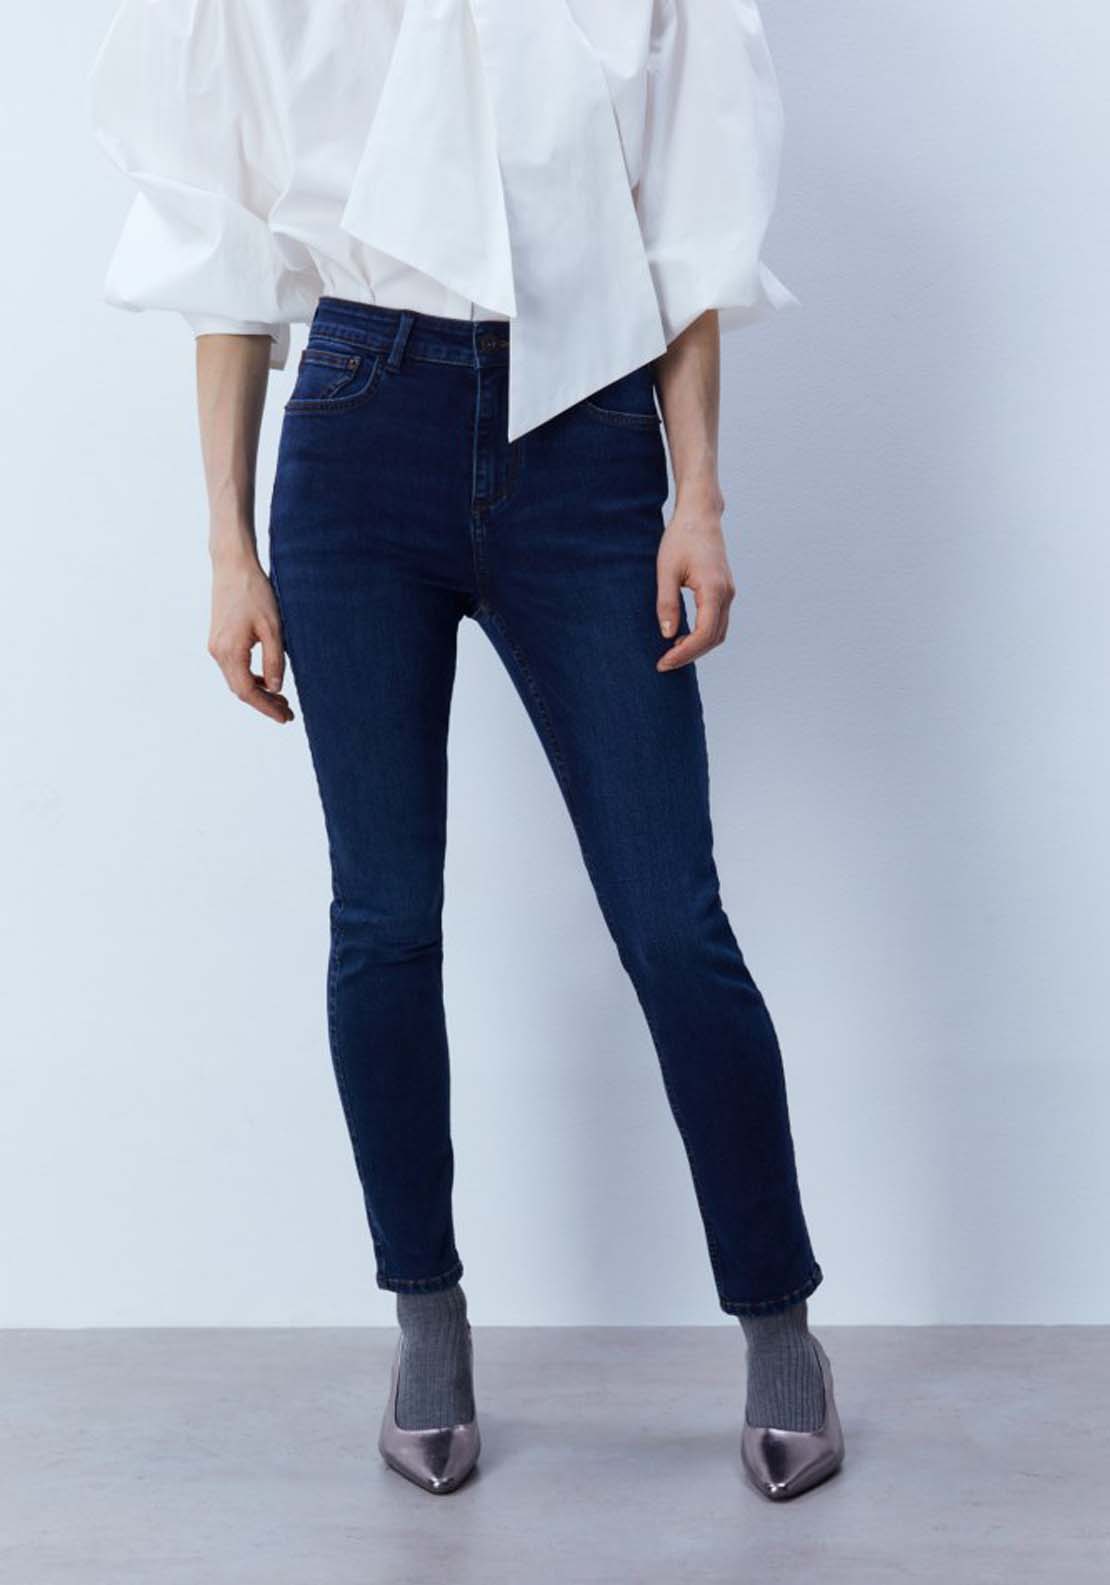 Sfera High-waist skinny jeans 1 Shaws Department Stores